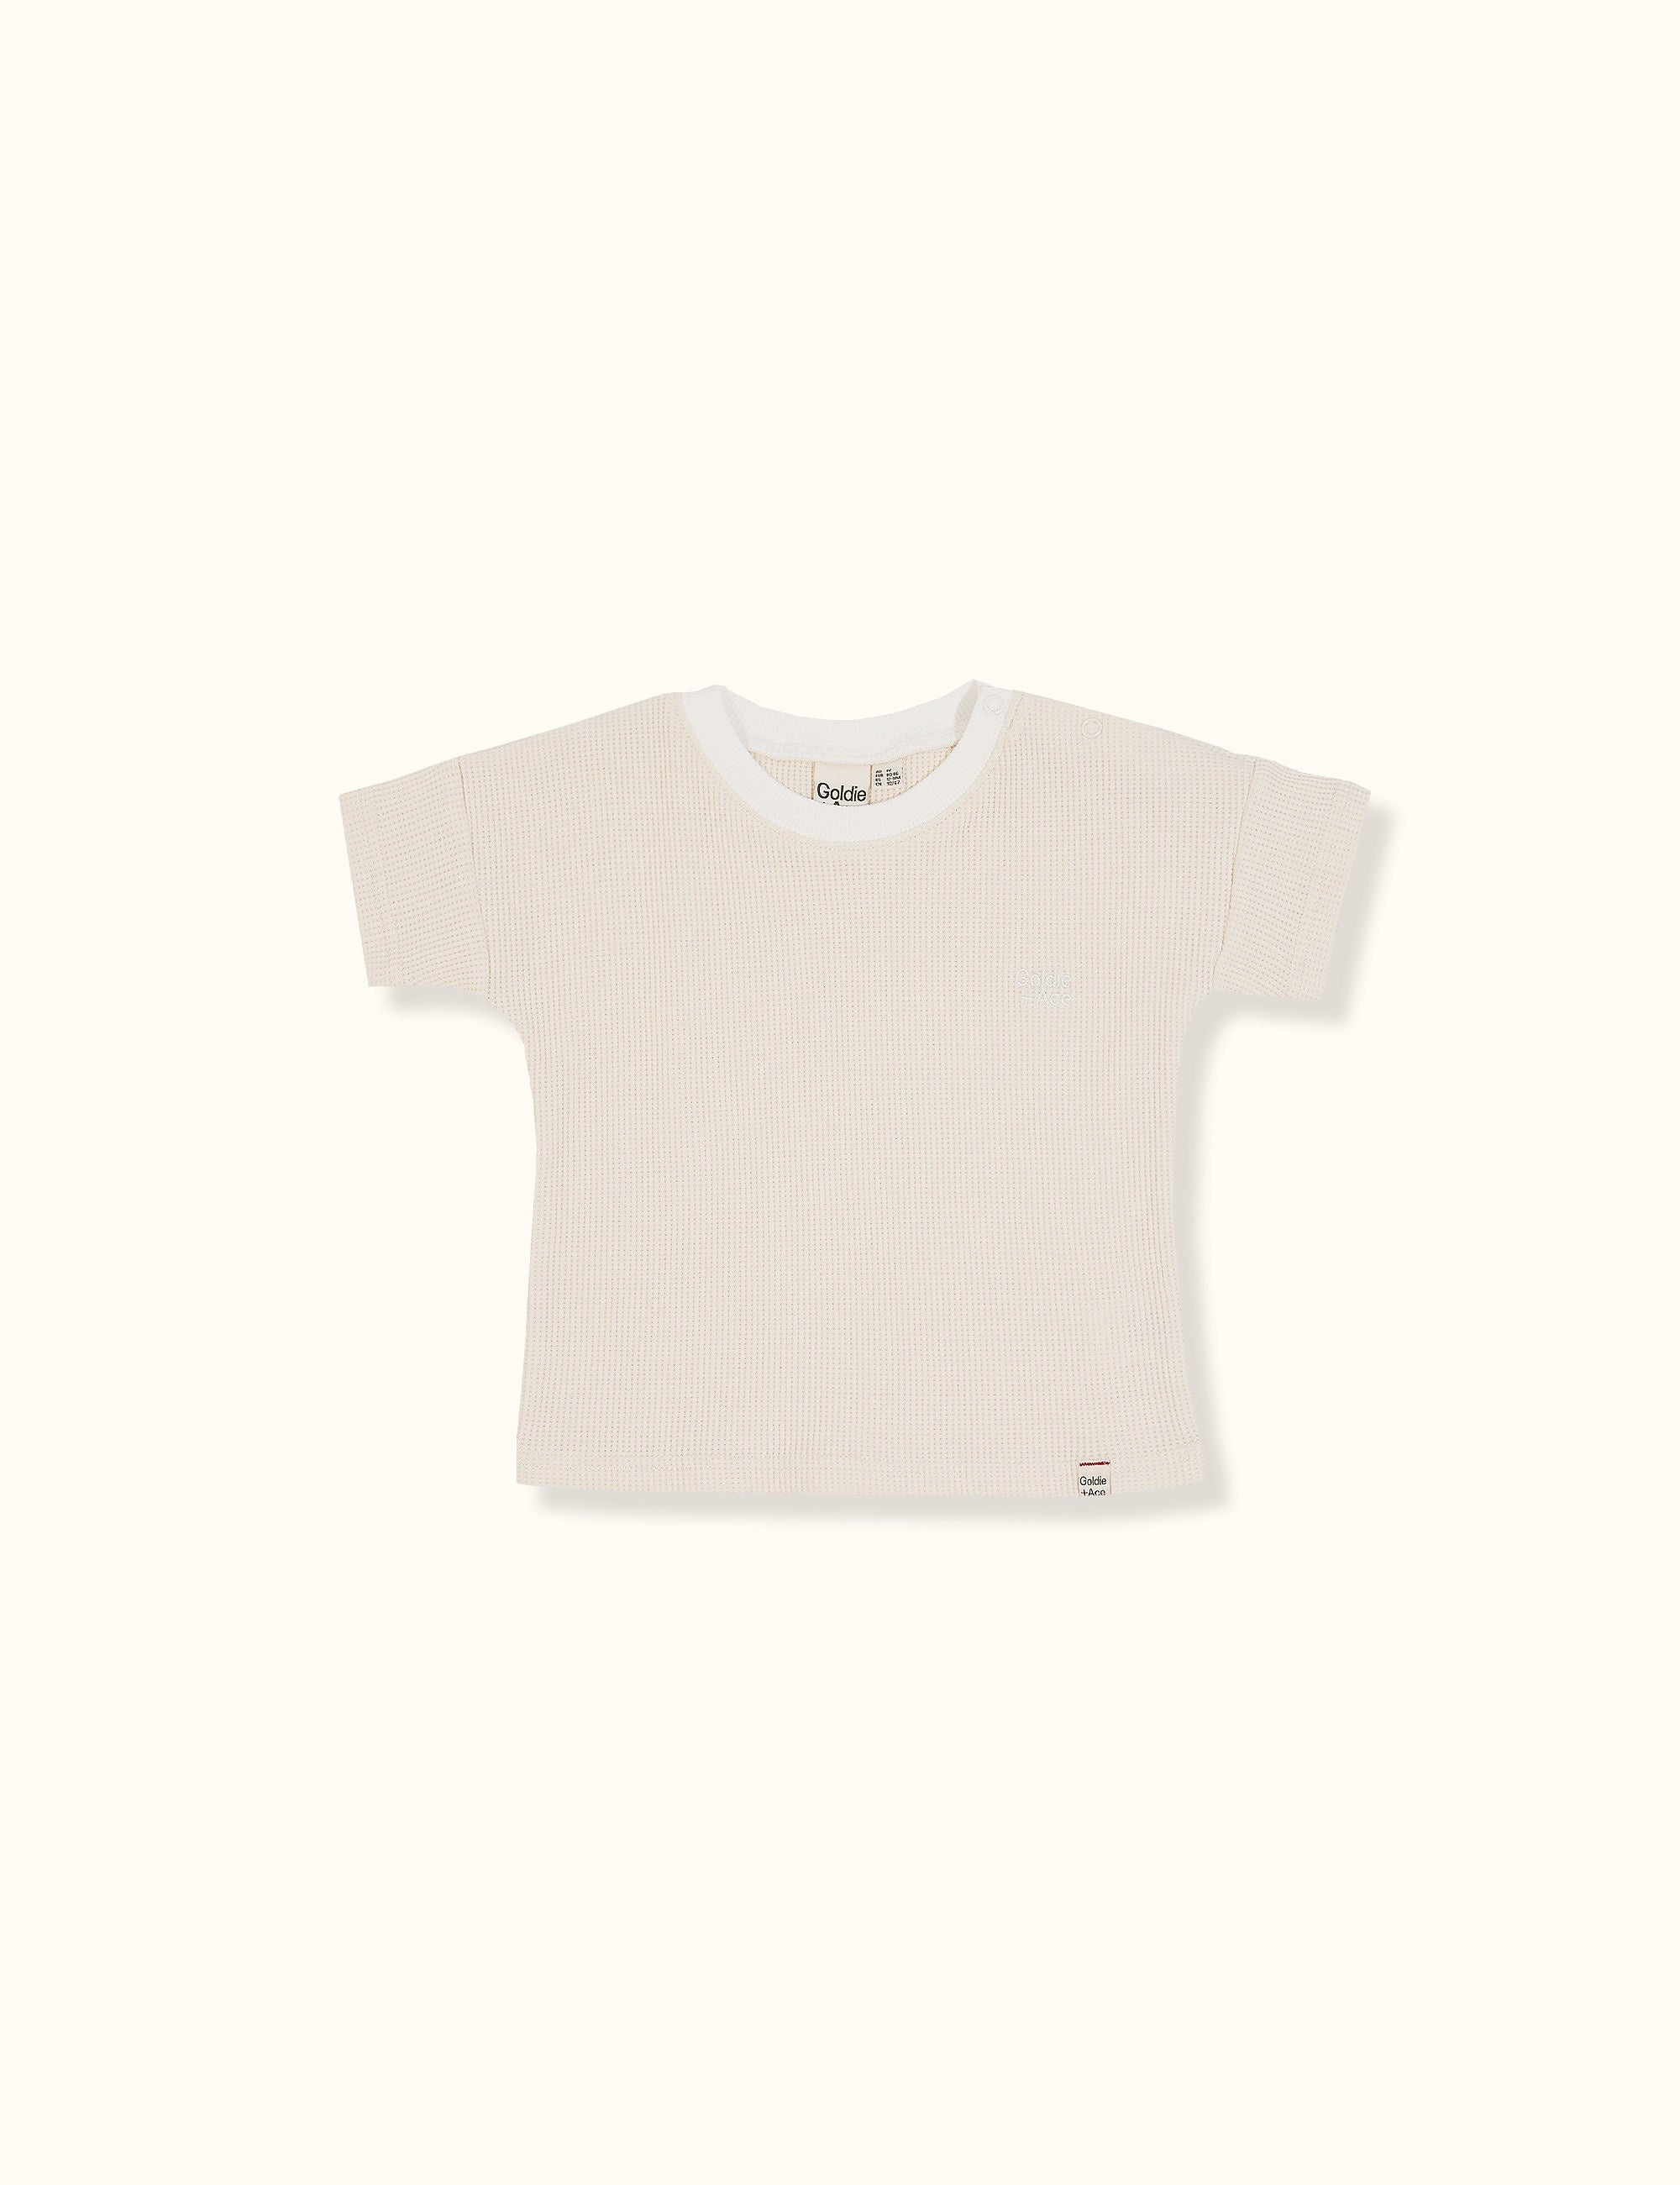 Goldie & Ace - Goldie Waffle Tee / Antique White